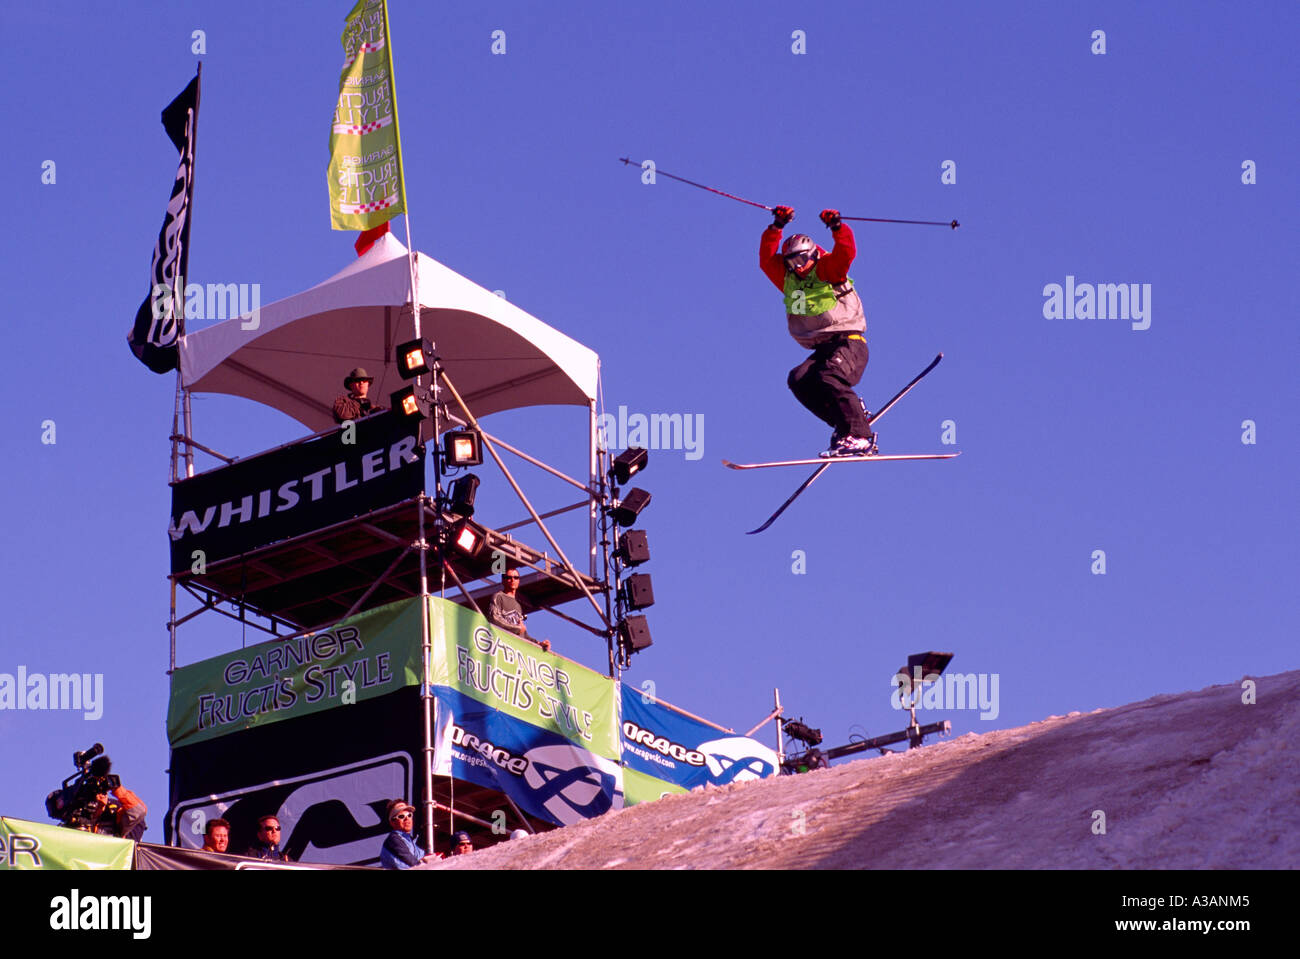 A Skier competing at the Big Air Freestyle Ski Competition Whistler British Columbia Canada Stock Photo